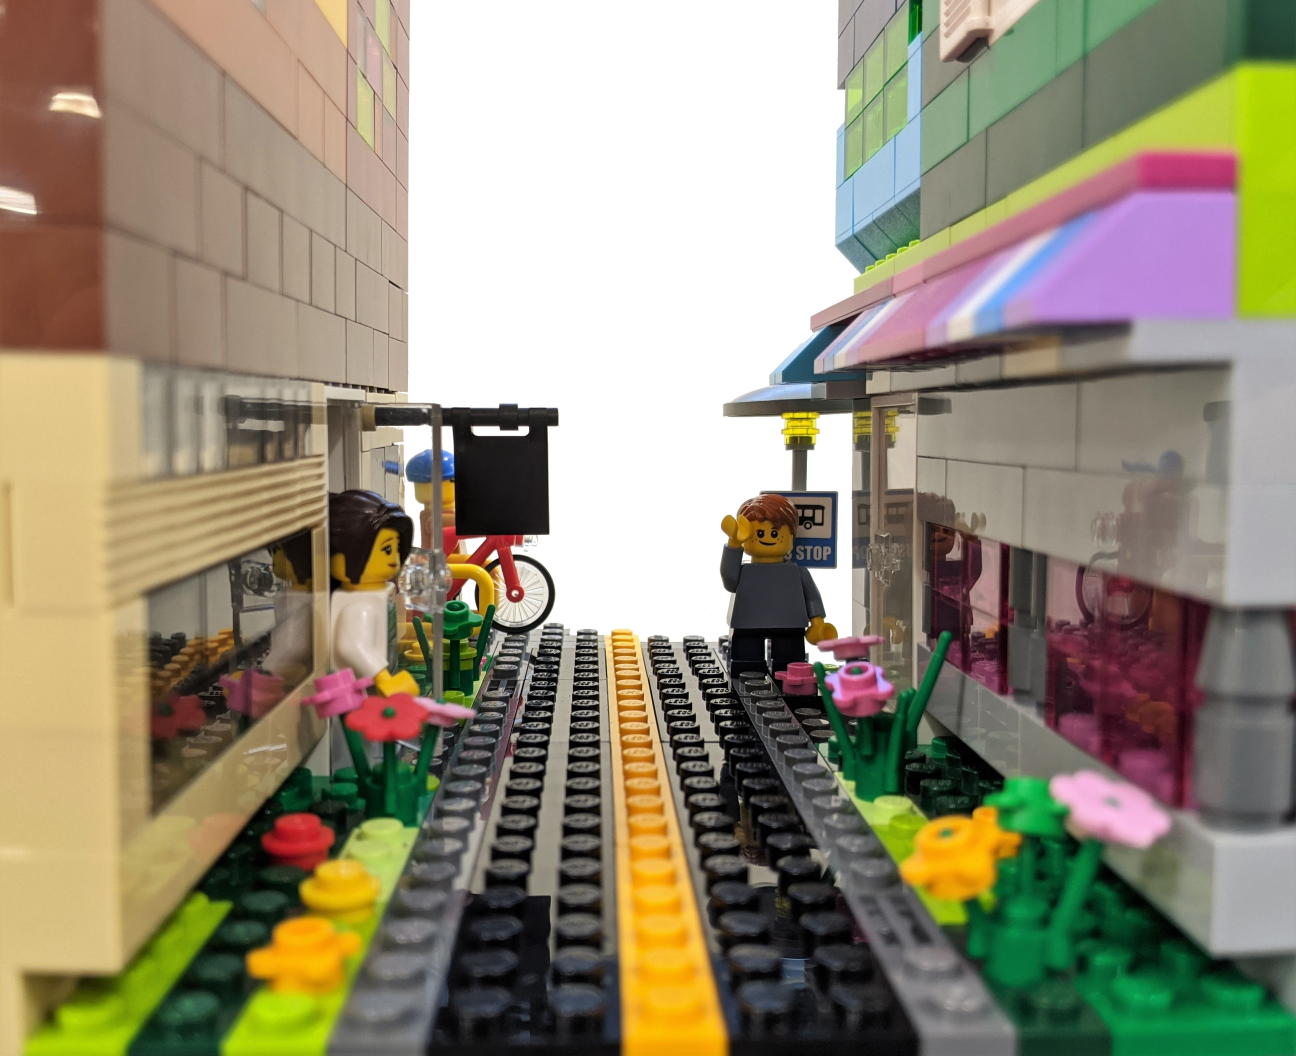 A close up photo of a LEGO book nook, showing a scene of a street with tall buildings on either side